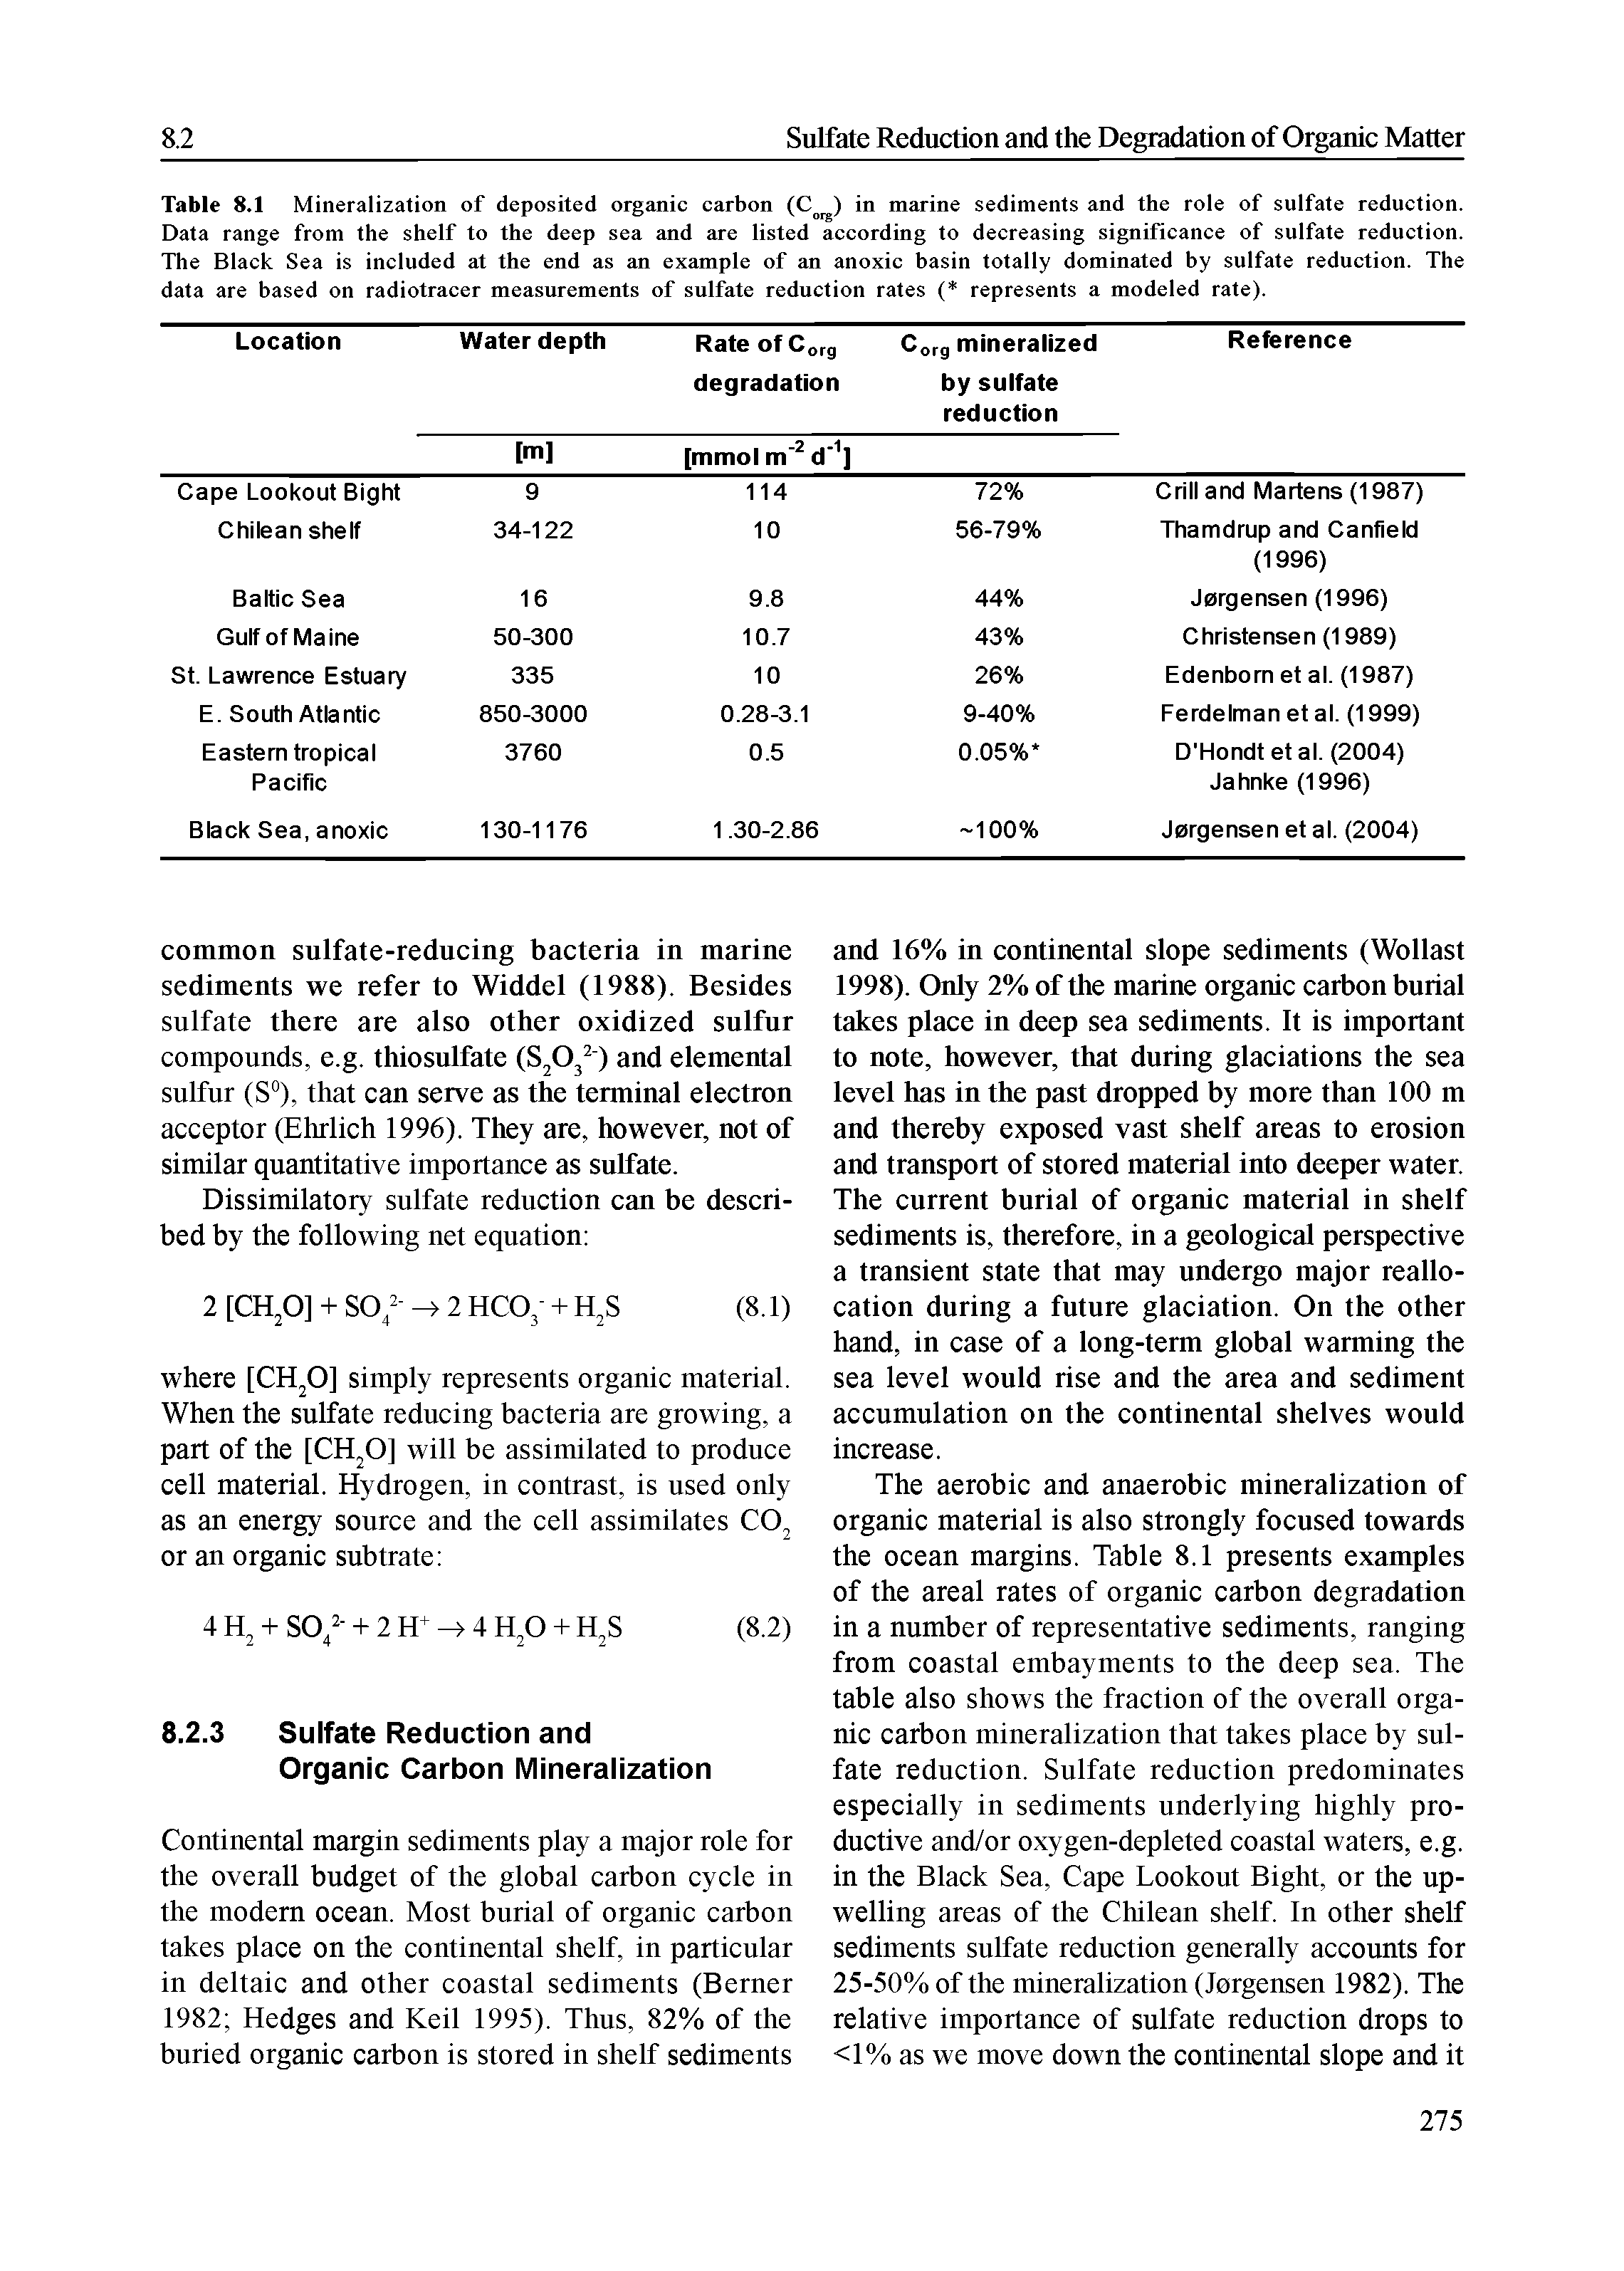 Table 8.1 Mineralization of deposited organic carbon in marine sediments and the role of sulfate reduction. Data range from the shelf to the deep sea and are listed according to decreasing significance of sulfate reduction. The Black Sea is included at the end as an example of an anoxic basin totally dominated by sulfate reduction. The data are based on radiotracer measurements of sulfate reduction rates ( represents a modeled rate). ...